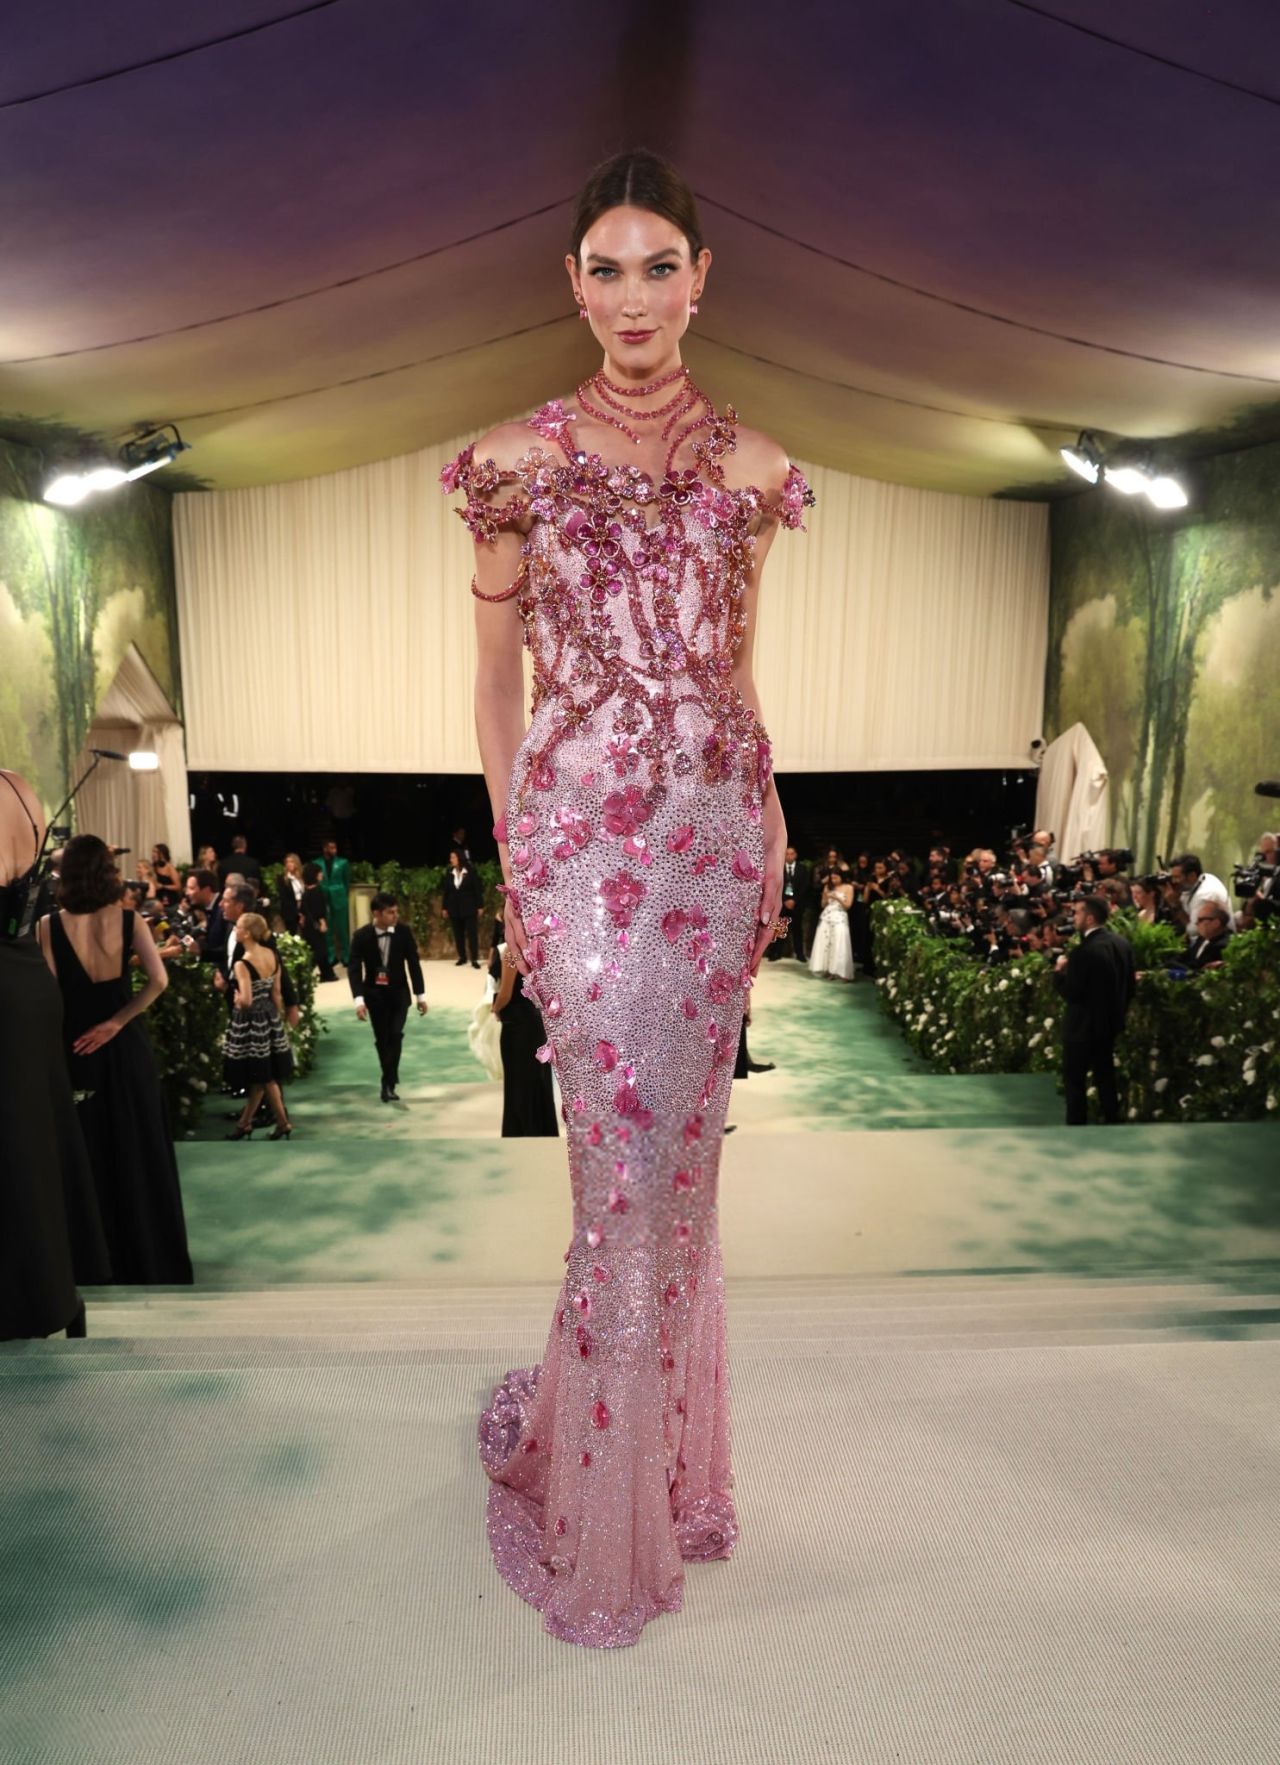 KARLIE KLOSS IN PINK BEJEWELED GOWN AT THE 2024 MET GALA IN NEW YORK11